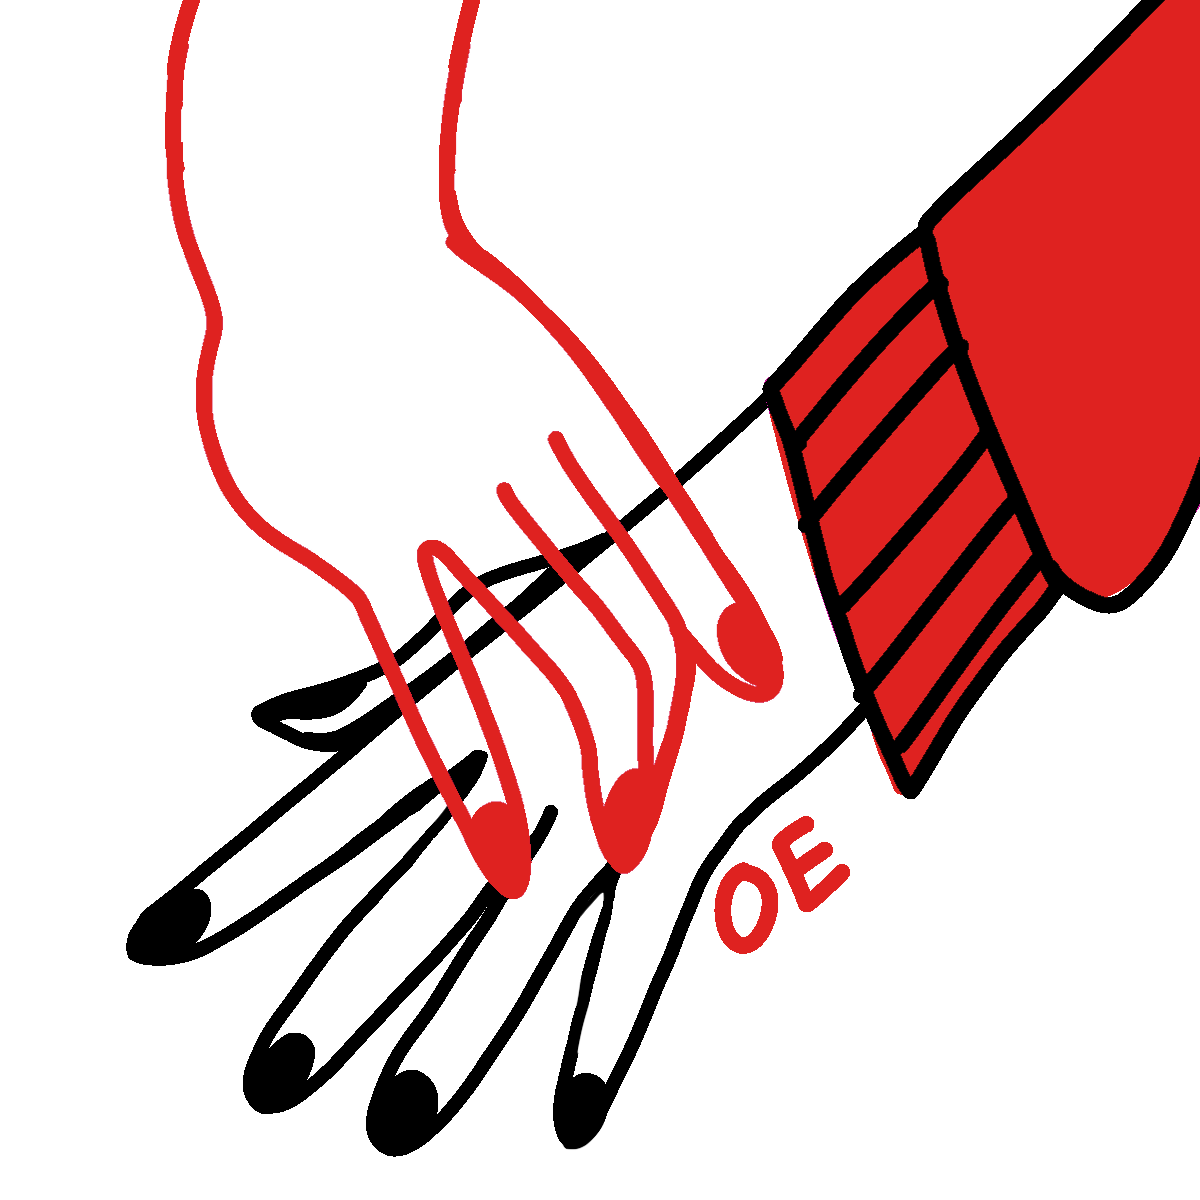 illustration of two hands, one lined with black and the other red, brushing one another